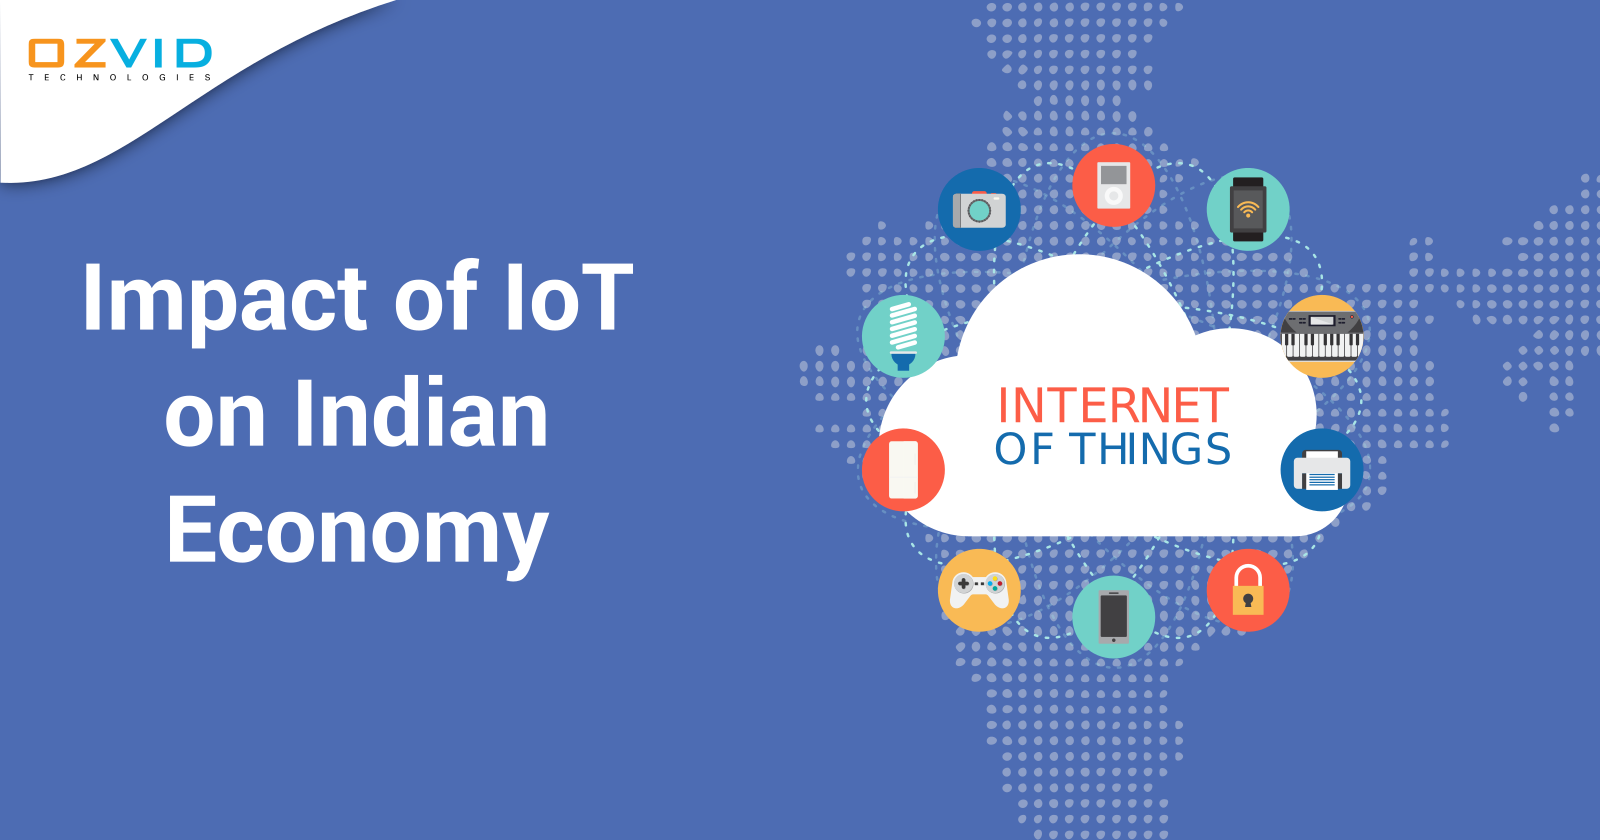 Will IoT be the Next Big Thing for India?